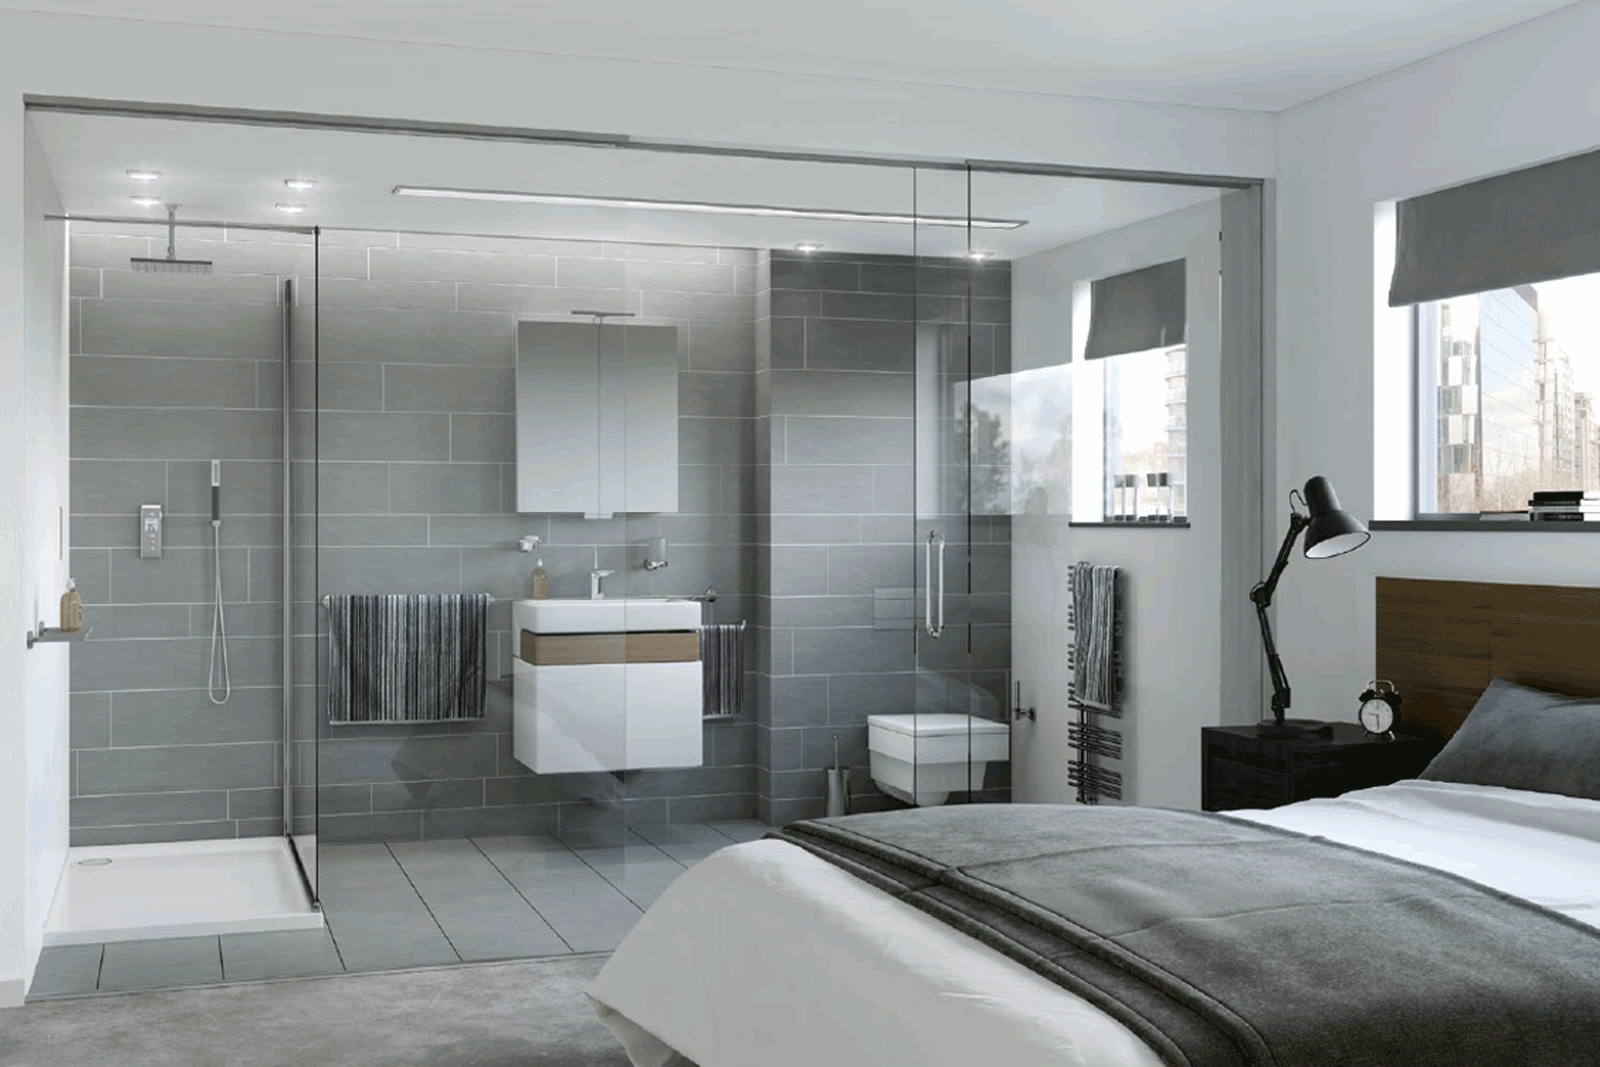 Benefits of Ensuite Bathroom (attached bathroom ideas) 2020? House